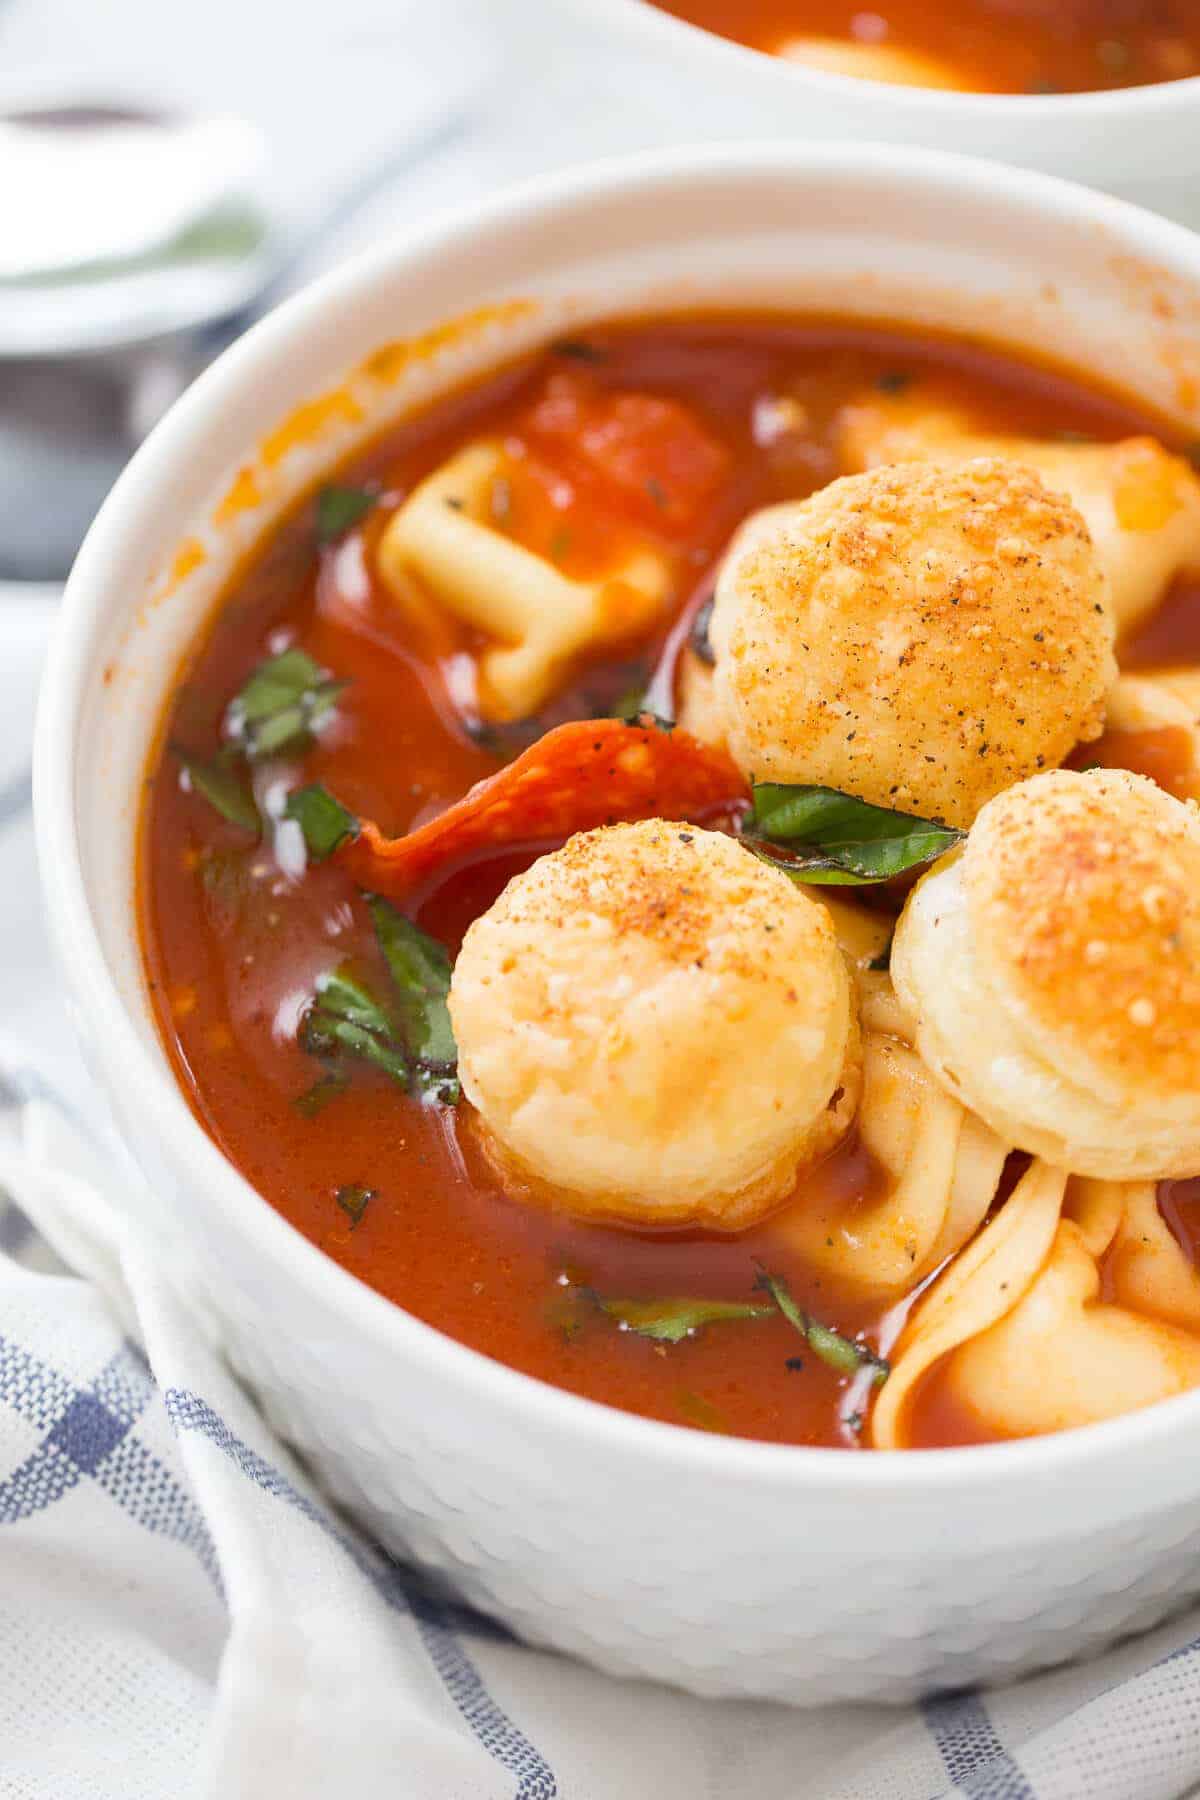 This pizza soup is going to be a family favorite! Who can resist pizza?